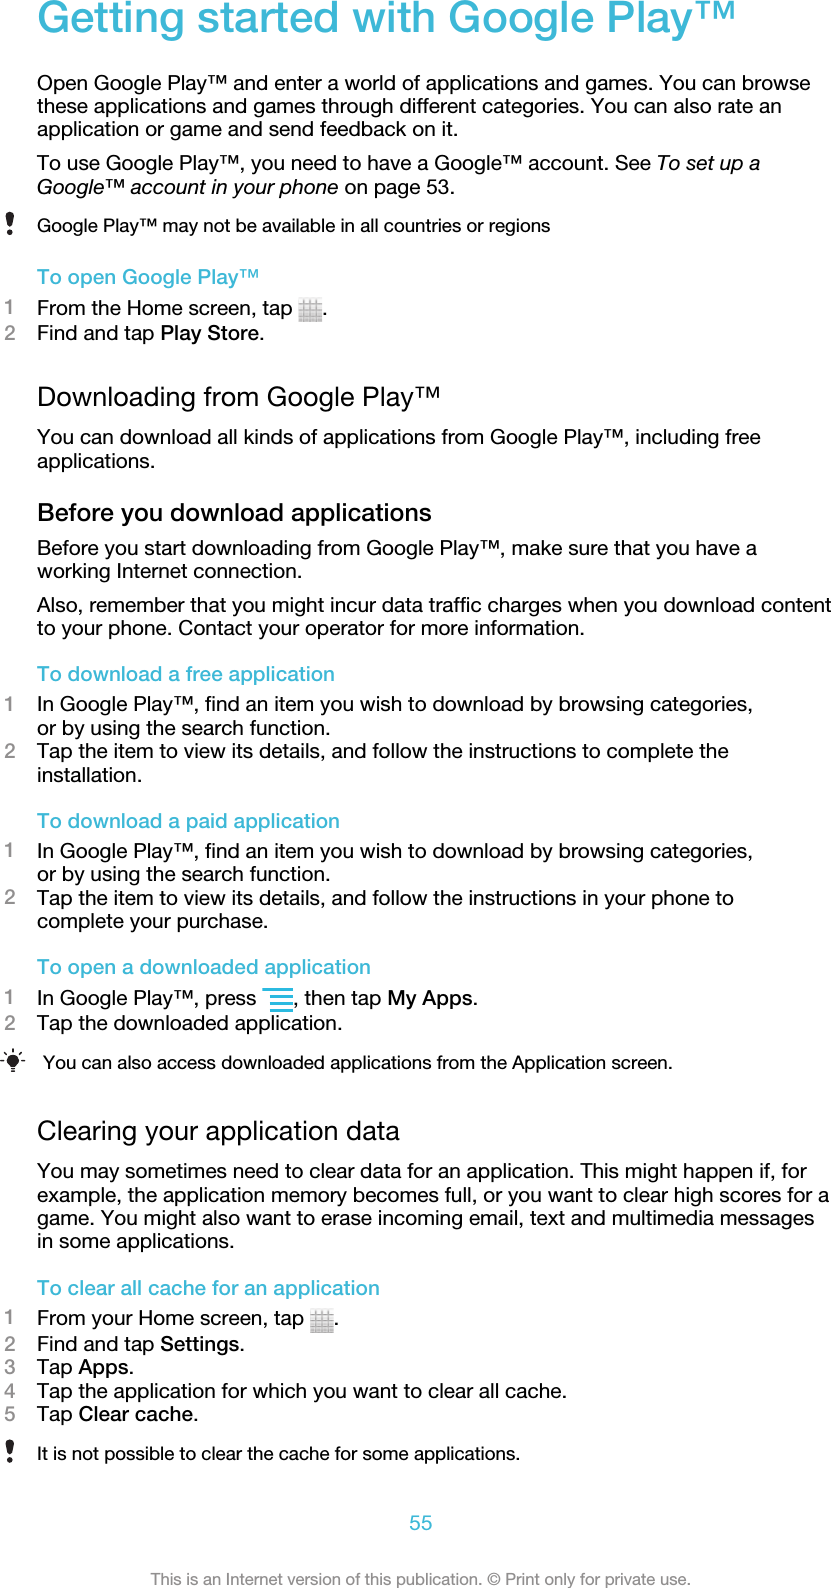 Getting started with Google Play™Open Google Play™ and enter a world of applications and games. You can browsethese applications and games through different categories. You can also rate anapplication or game and send feedback on it.To use Google Play™, you need to have a Google™ account. See To set up aGoogle™ account in your phone on page 53.Google Play™ may not be available in all countries or regionsTo open Google Play™1From the Home screen, tap  .2Find and tap Play Store.Downloading from Google Play™You can download all kinds of applications from Google Play™, including freeapplications.Before you download applicationsBefore you start downloading from Google Play™, make sure that you have aworking Internet connection.Also, remember that you might incur data traffic charges when you download contentto your phone. Contact your operator for more information.To download a free application1In Google Play™, find an item you wish to download by browsing categories,or by using the search function.2Tap the item to view its details, and follow the instructions to complete theinstallation.To download a paid application1In Google Play™, find an item you wish to download by browsing categories,or by using the search function.2Tap the item to view its details, and follow the instructions in your phone tocomplete your purchase.To open a downloaded application1In Google Play™, press  , then tap My Apps.2Tap the downloaded application.You can also access downloaded applications from the Application screen.Clearing your application dataYou may sometimes need to clear data for an application. This might happen if, forexample, the application memory becomes full, or you want to clear high scores for agame. You might also want to erase incoming email, text and multimedia messagesin some applications.To clear all cache for an application1From your Home screen, tap  .2Find and tap Settings.3Tap Apps.4Tap the application for which you want to clear all cache.5Tap Clear cache.It is not possible to clear the cache for some applications.55This is an Internet version of this publication. © Print only for private use.